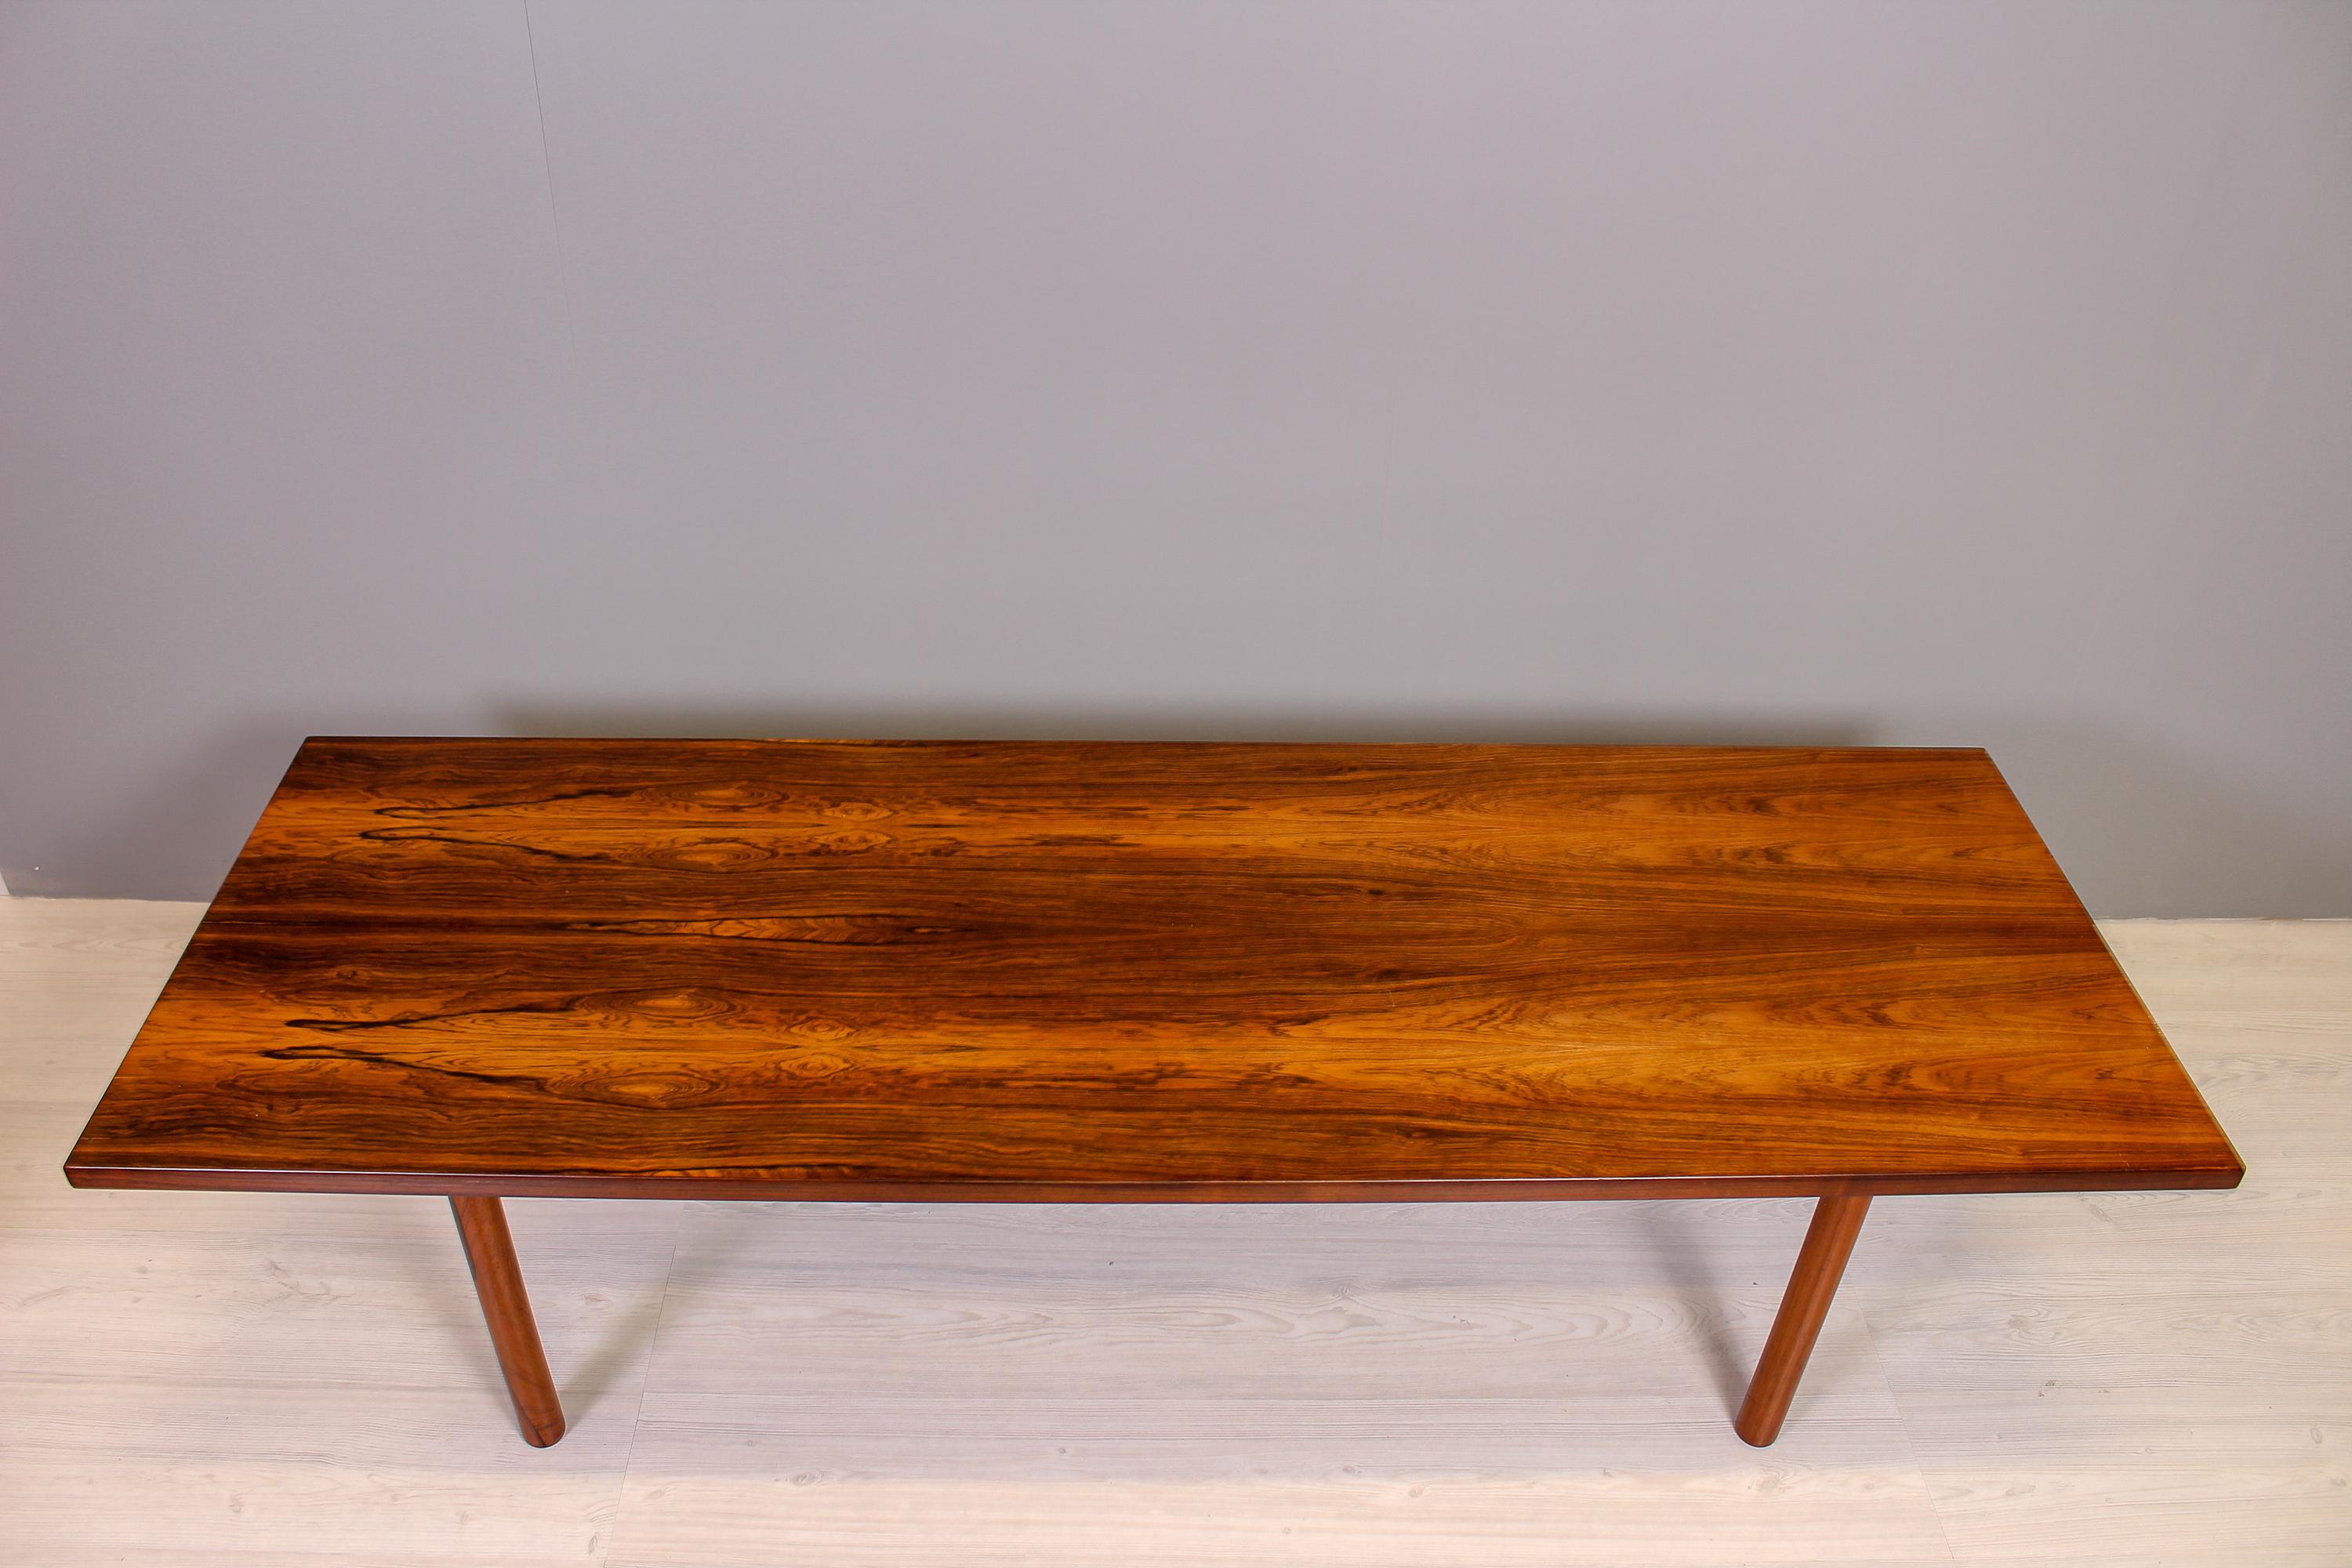 A solid rosewood coffee table by Danish designer Hans J Wenger. The model is called AT-12 and was manufactured by Andreas Tuck. Excellent vintage condition with original finish.